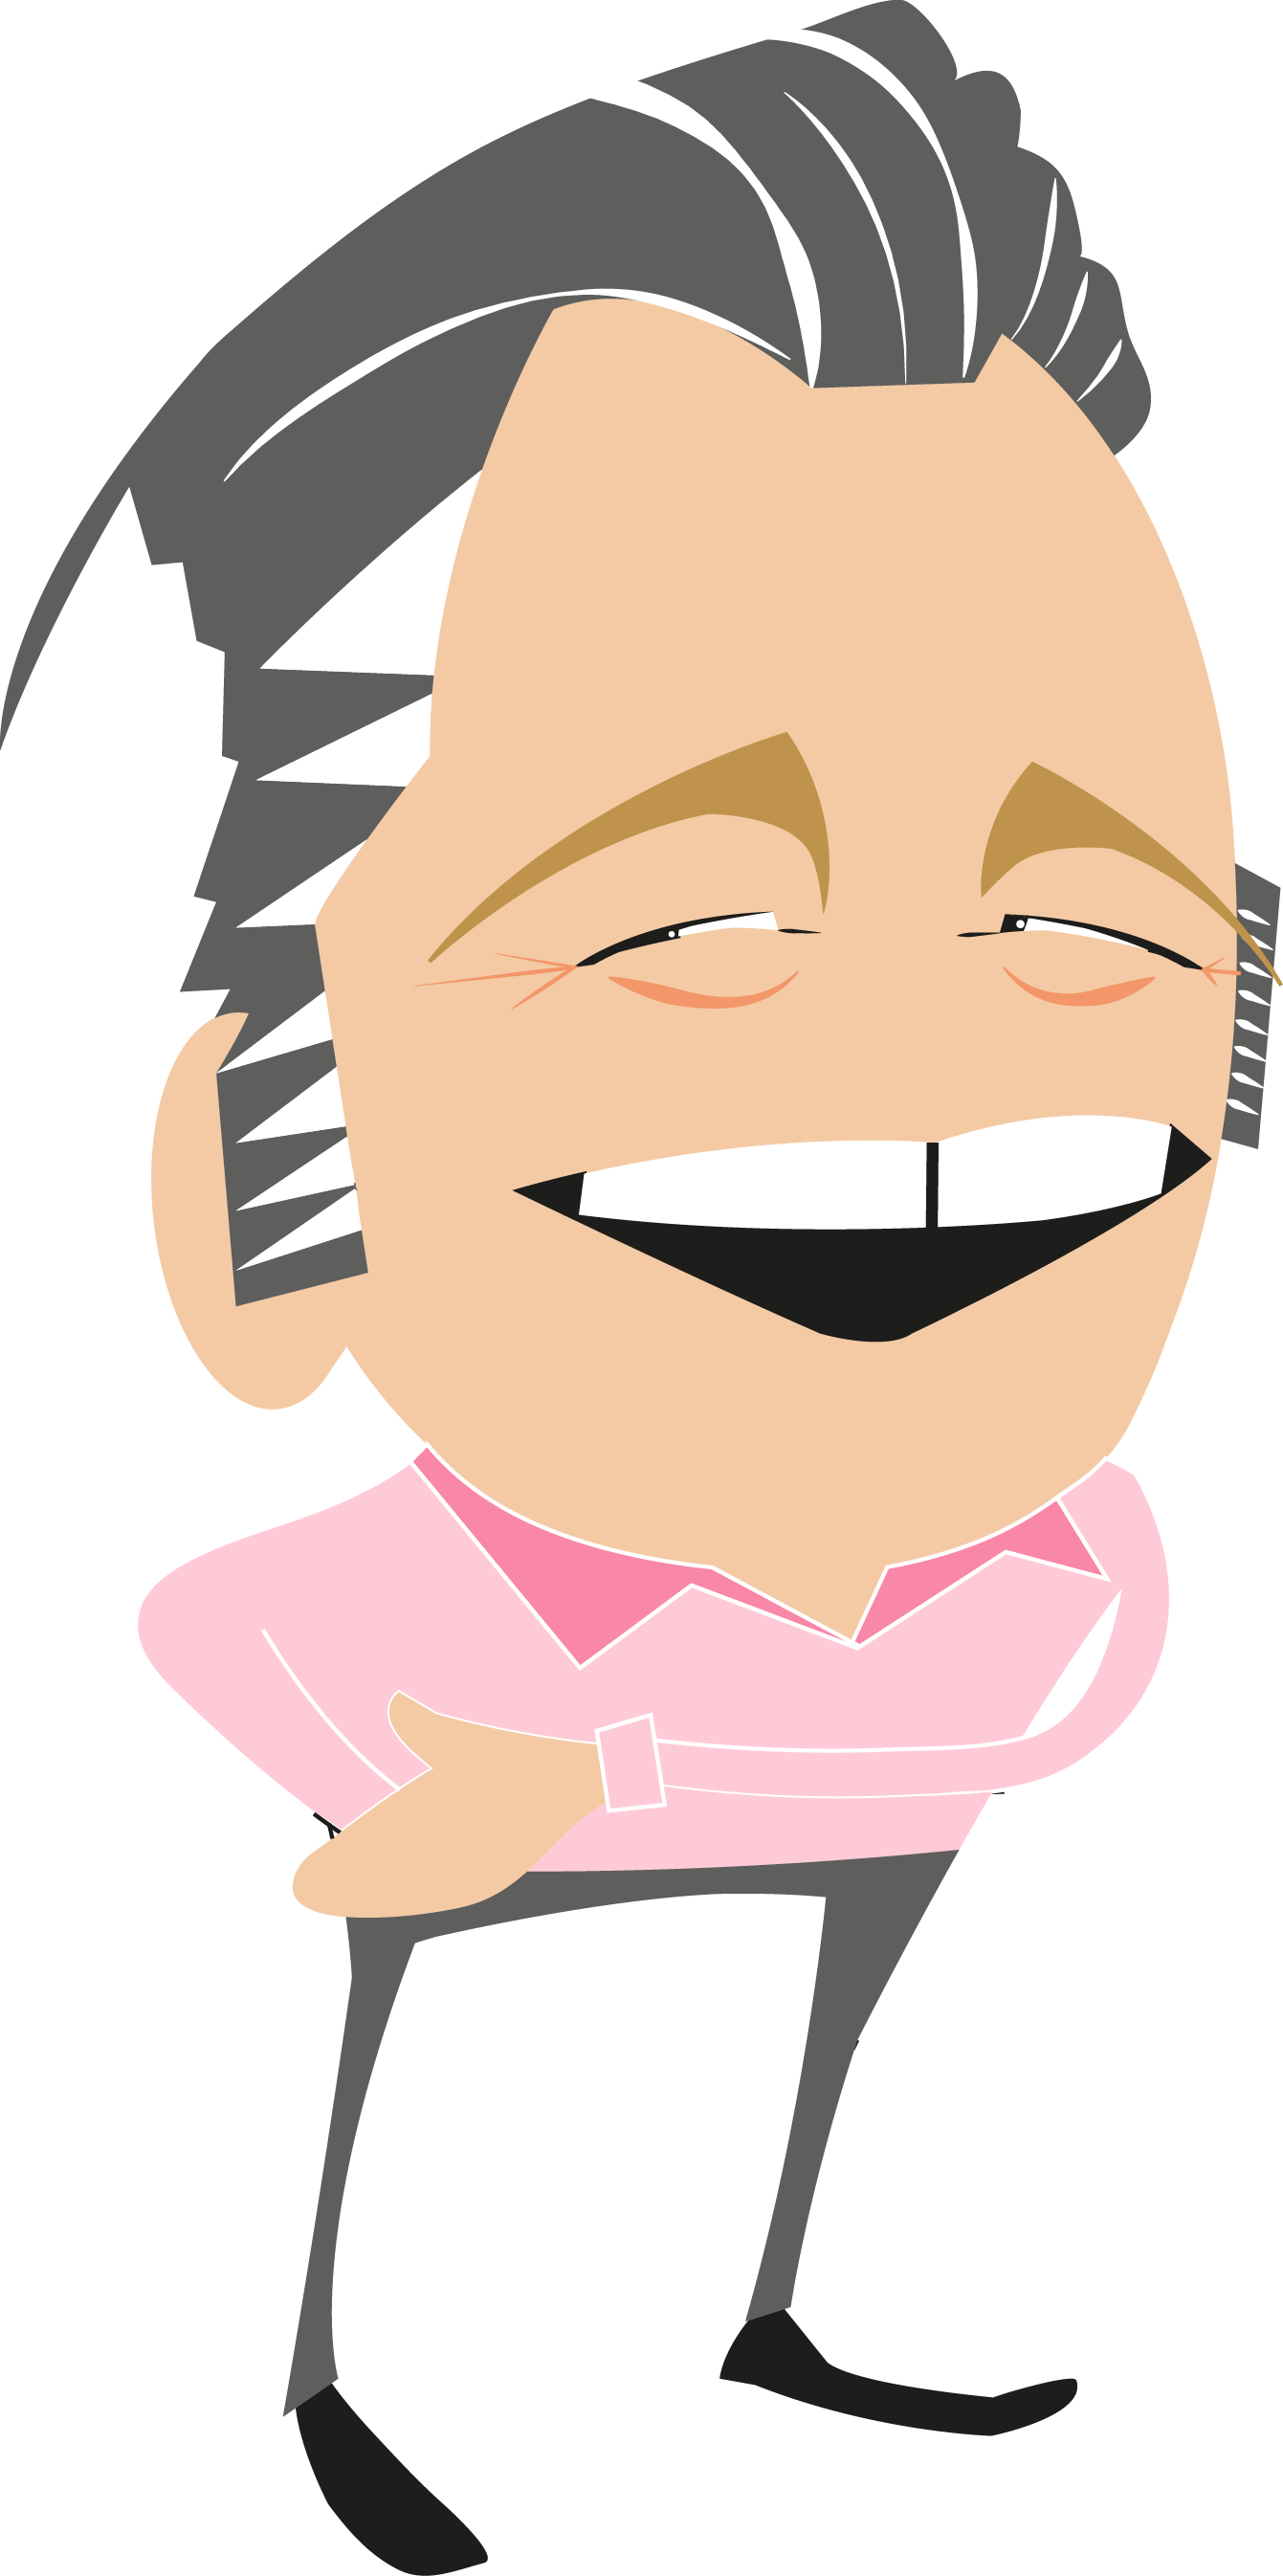 eyebrow clipart caricature